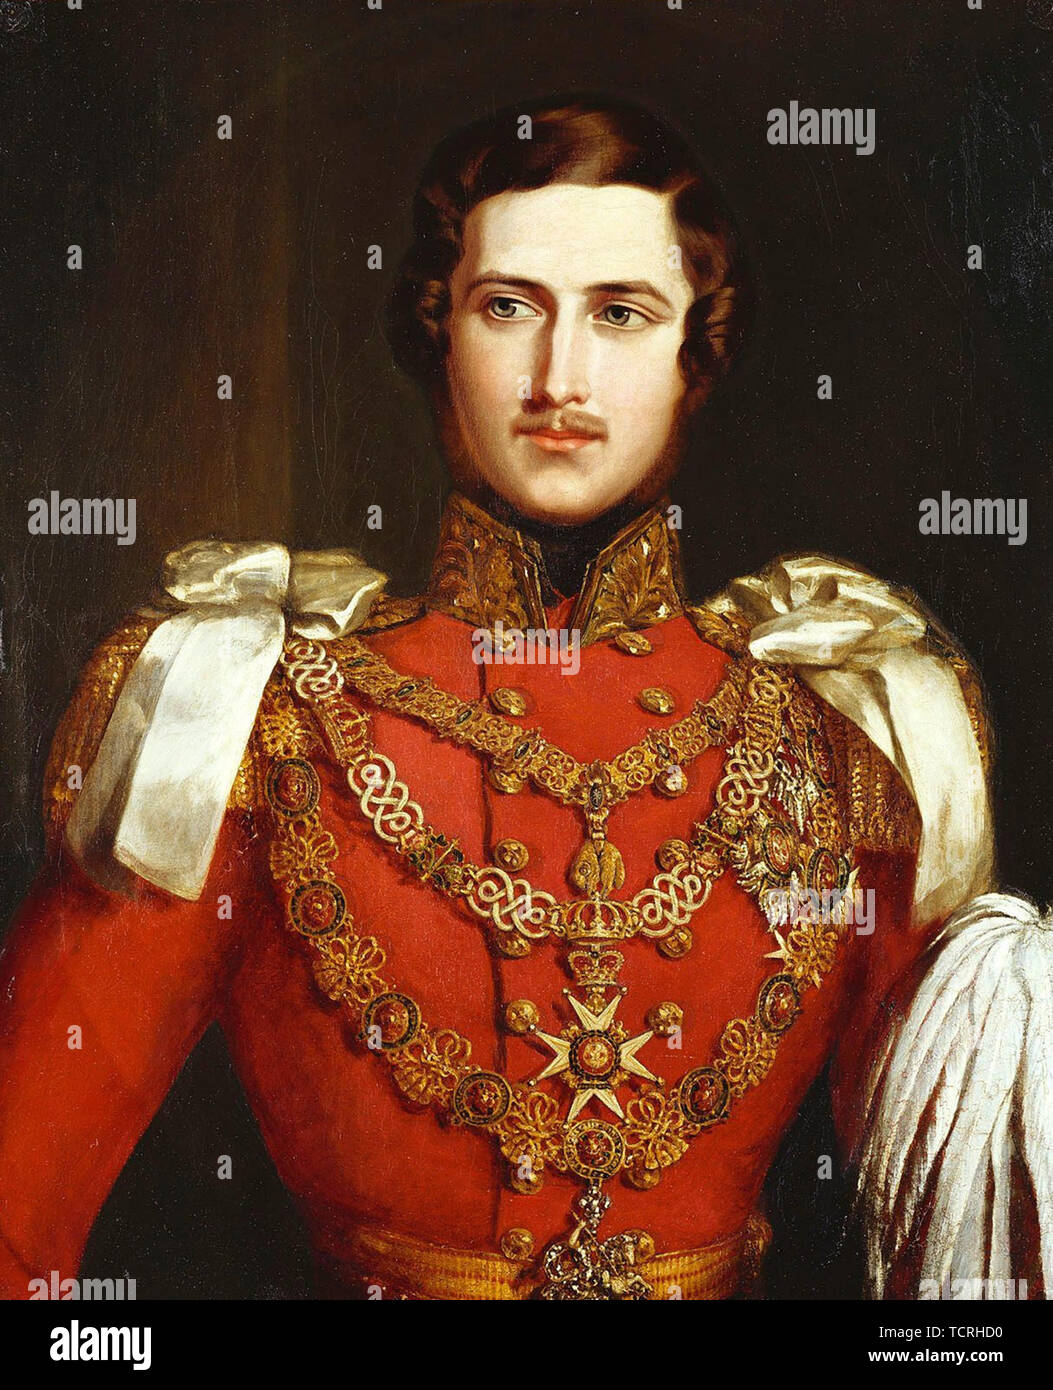 Prince Albert of Saxe-Coburg and Gotha (Francis Albert Augustus Charles Emmanuel, 1819 – 1861) was the husband of Queen Victoria. Portrait by John Partridge, 1840 Stock Photo